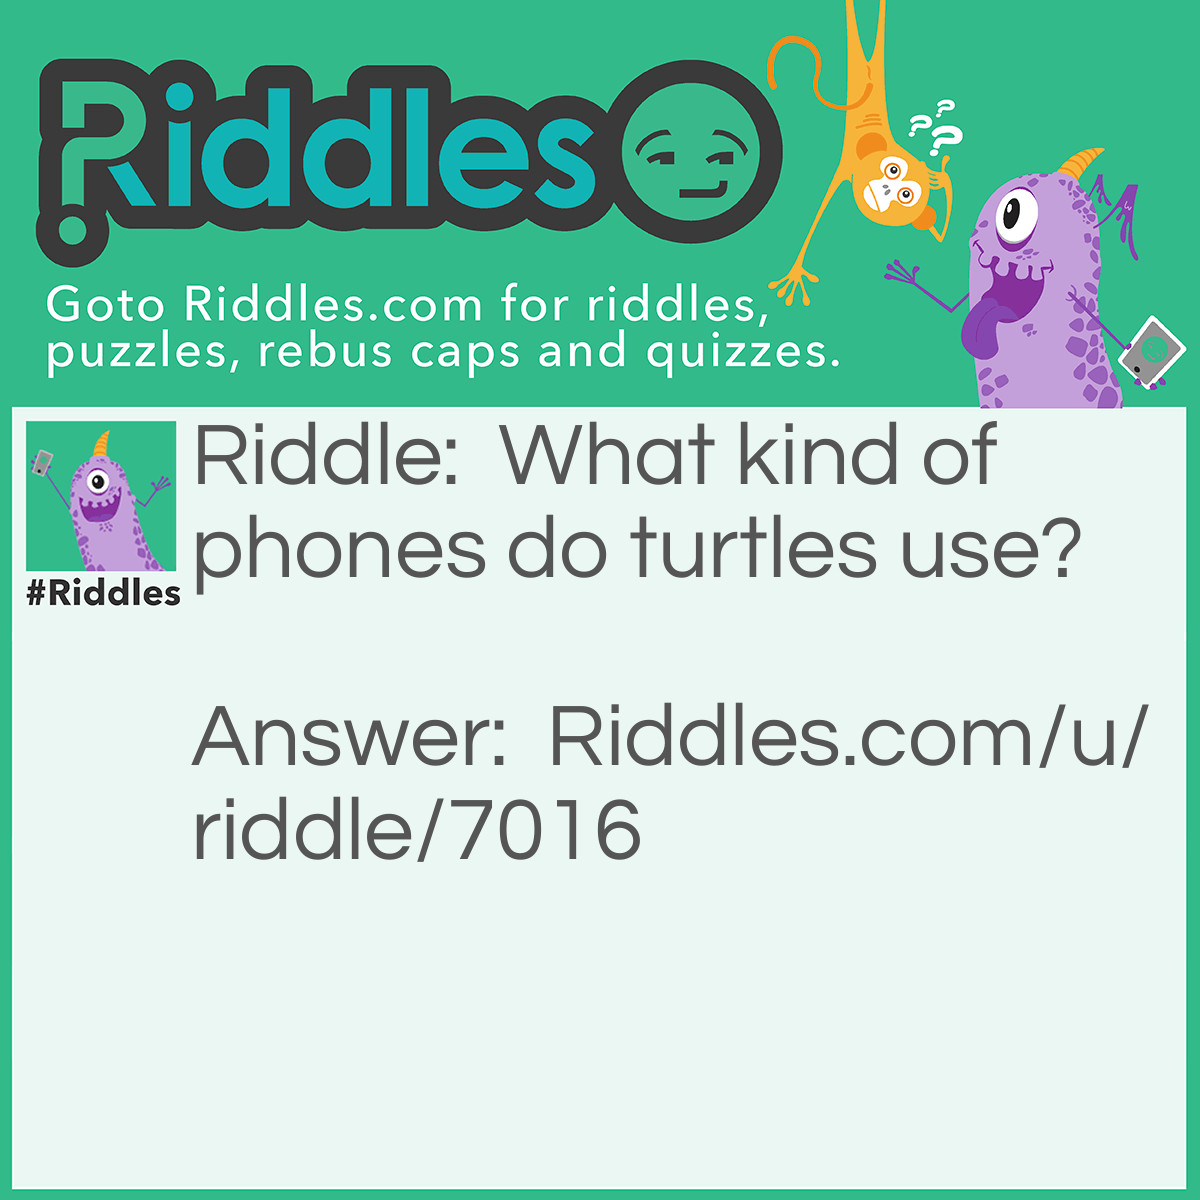 Riddle: What kind of phones do turtles use? Answer: Shell-ular Phones.